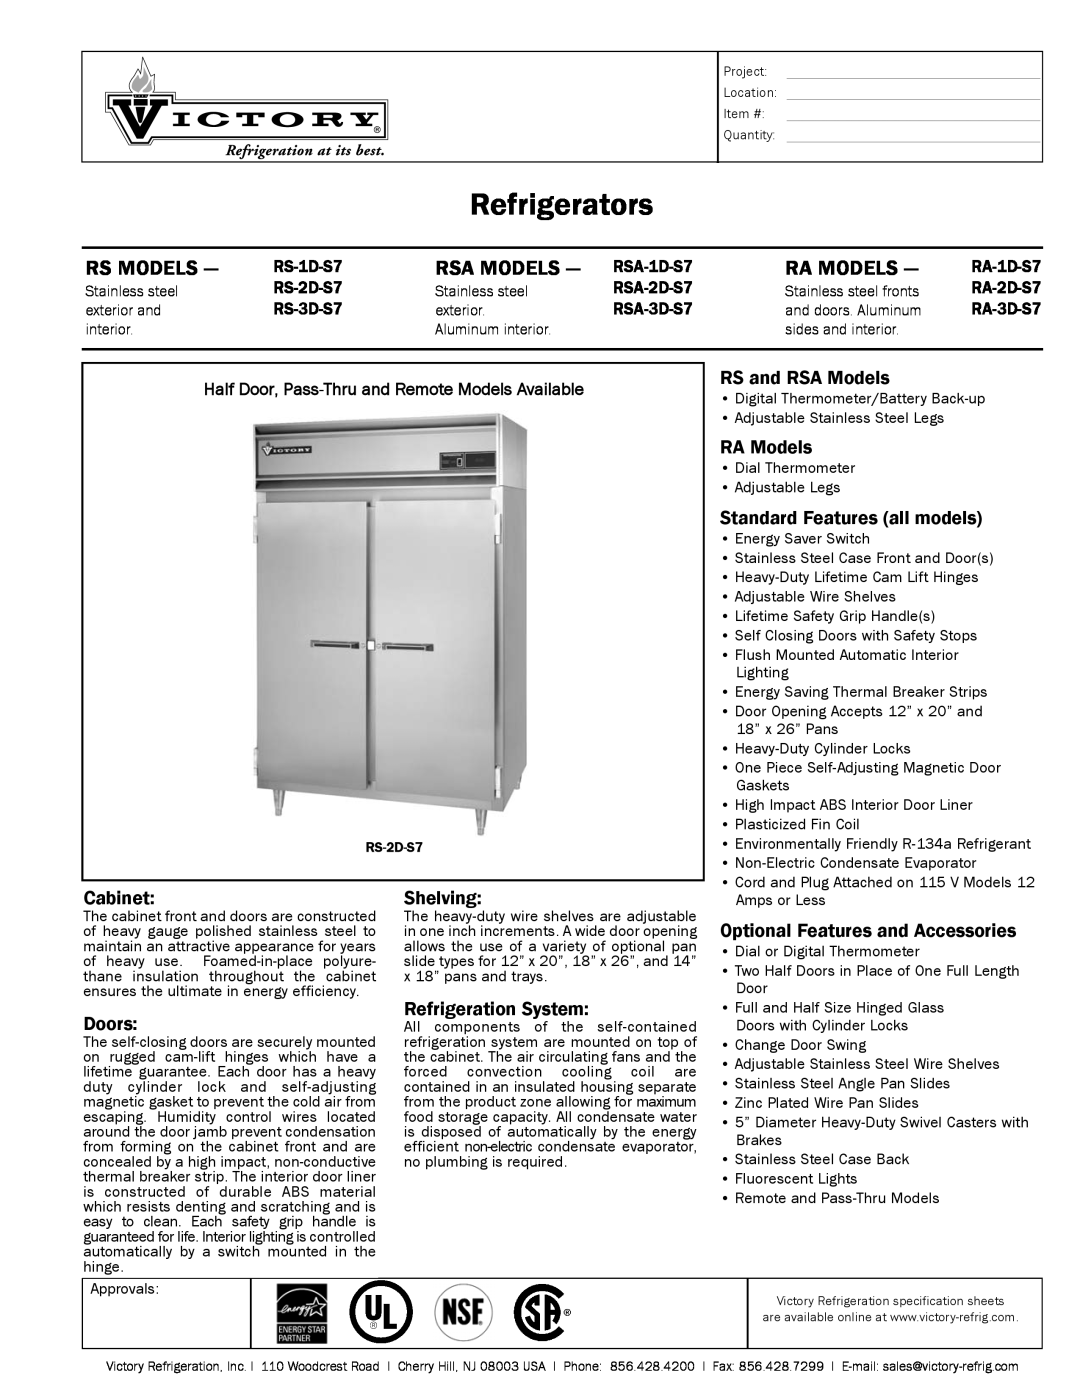 Victory Refrigeration RS-2D-S7 specifications Refrigerators, Rs Models, Rsa Models, Ra Models, RS and RSA Models, Cabinet 